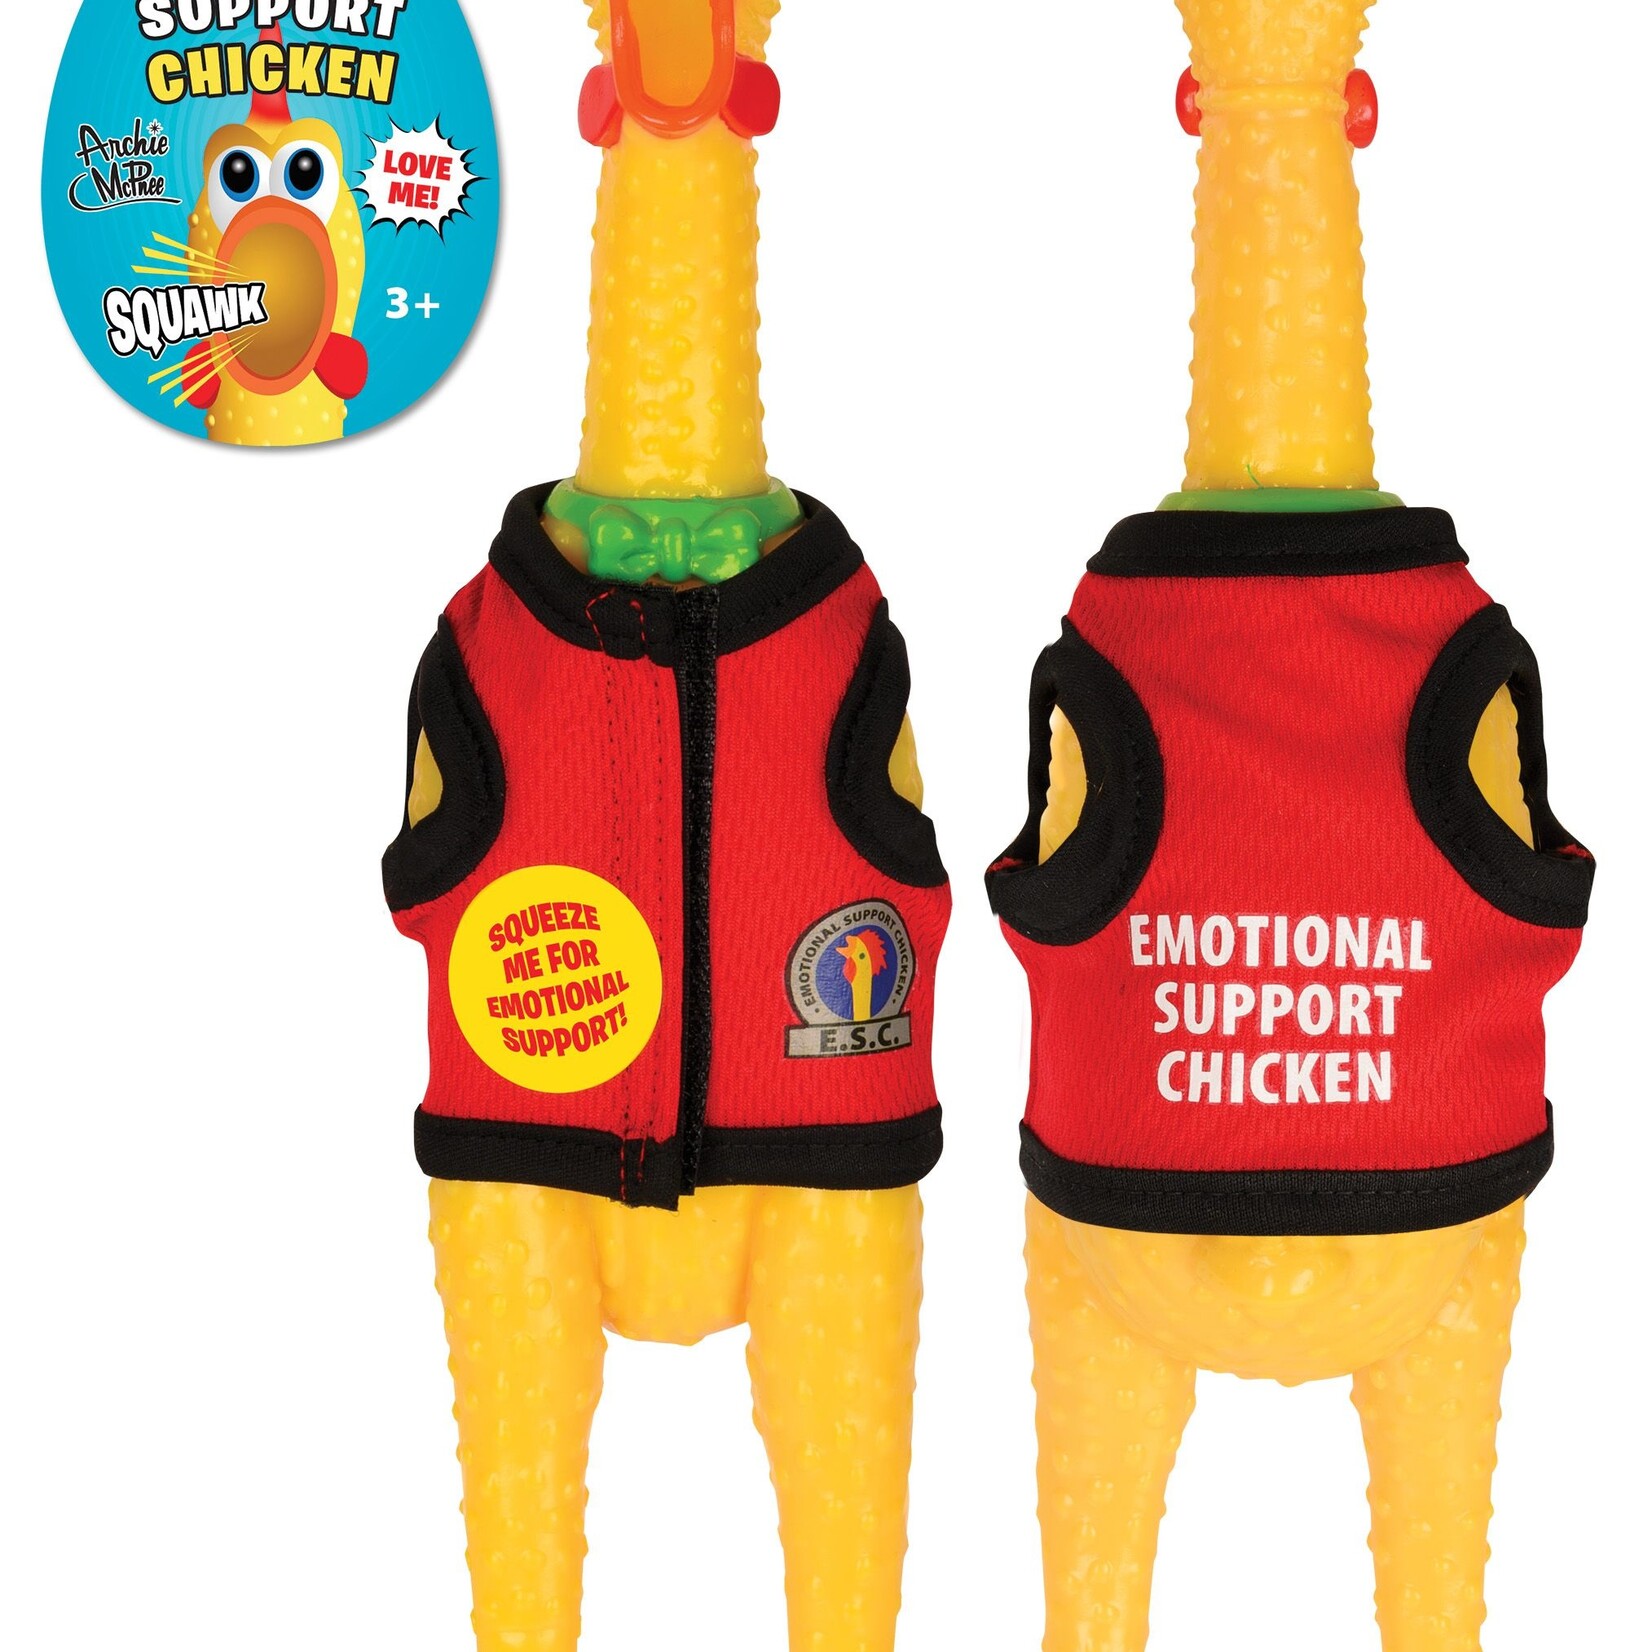 Accoutrements/Archie McPhee 12943 Emotional Support Chicken